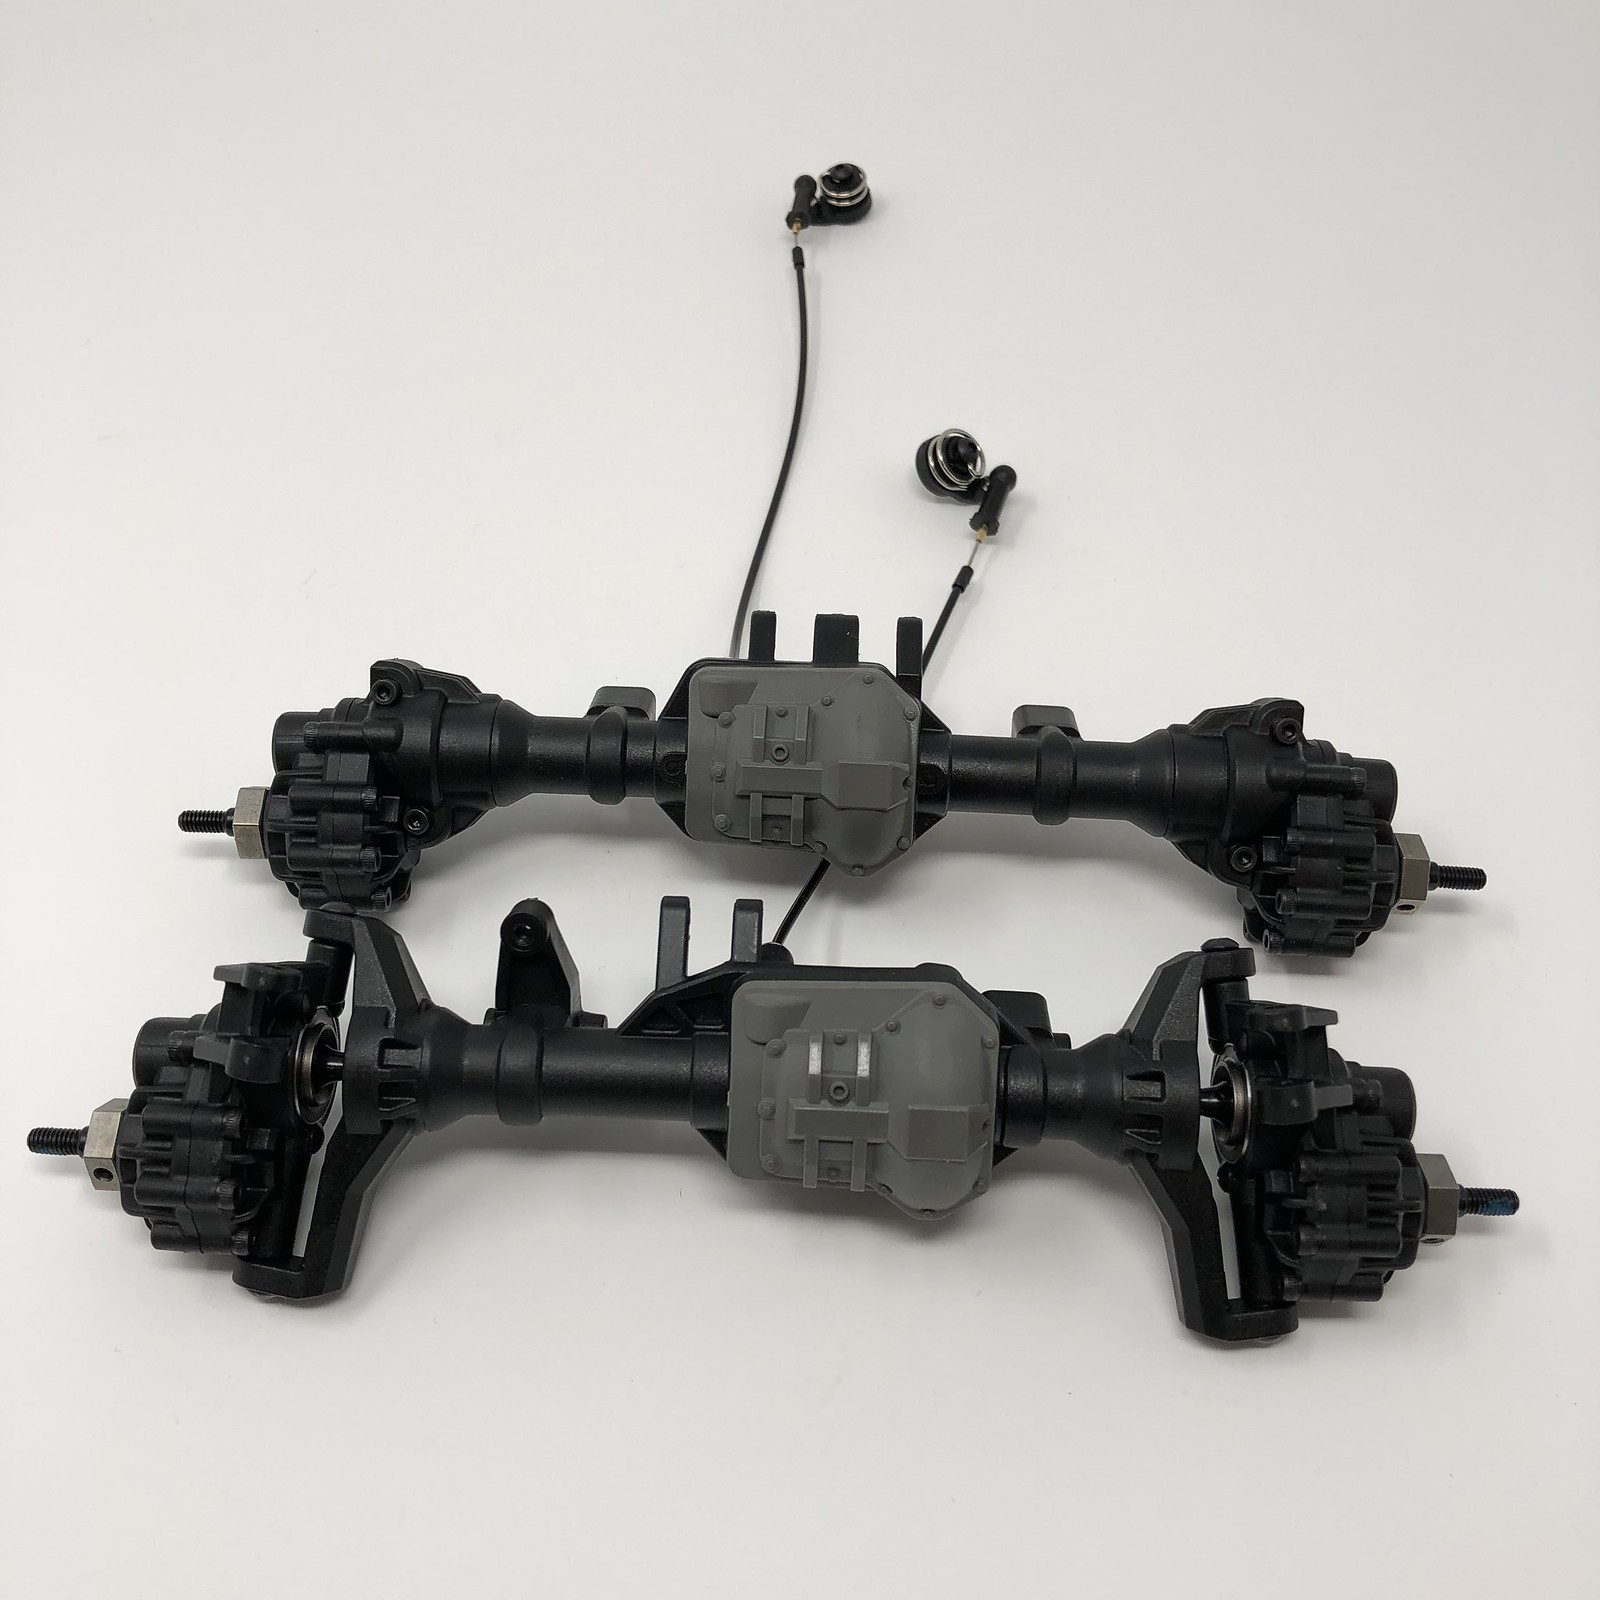 Traxxas TRX-4 TRX4 Front & Rear Axles with Diff Lockers Portals & Hexs Brand New 